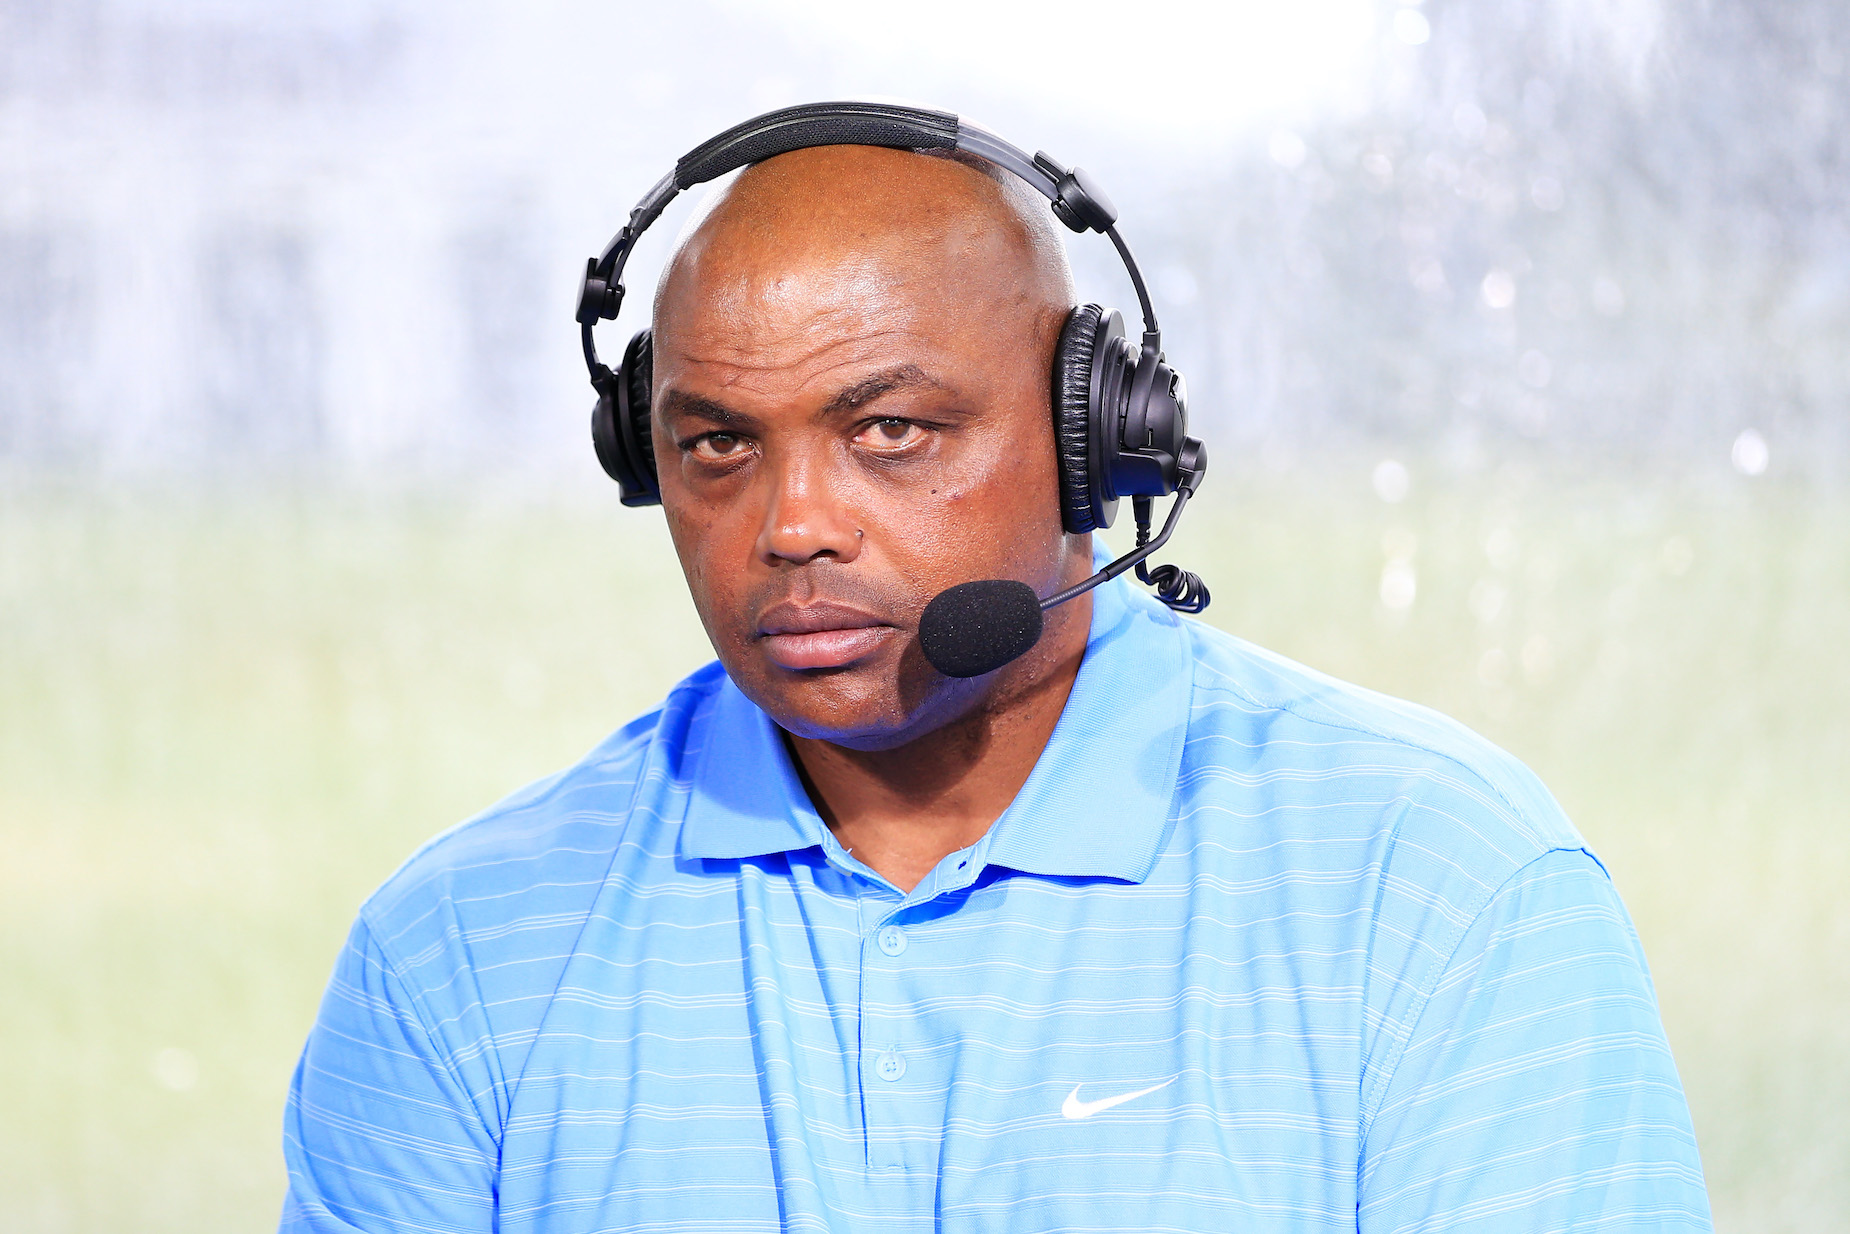 Former NBA player and current TV analyst Charles Barkley during 'The Match'